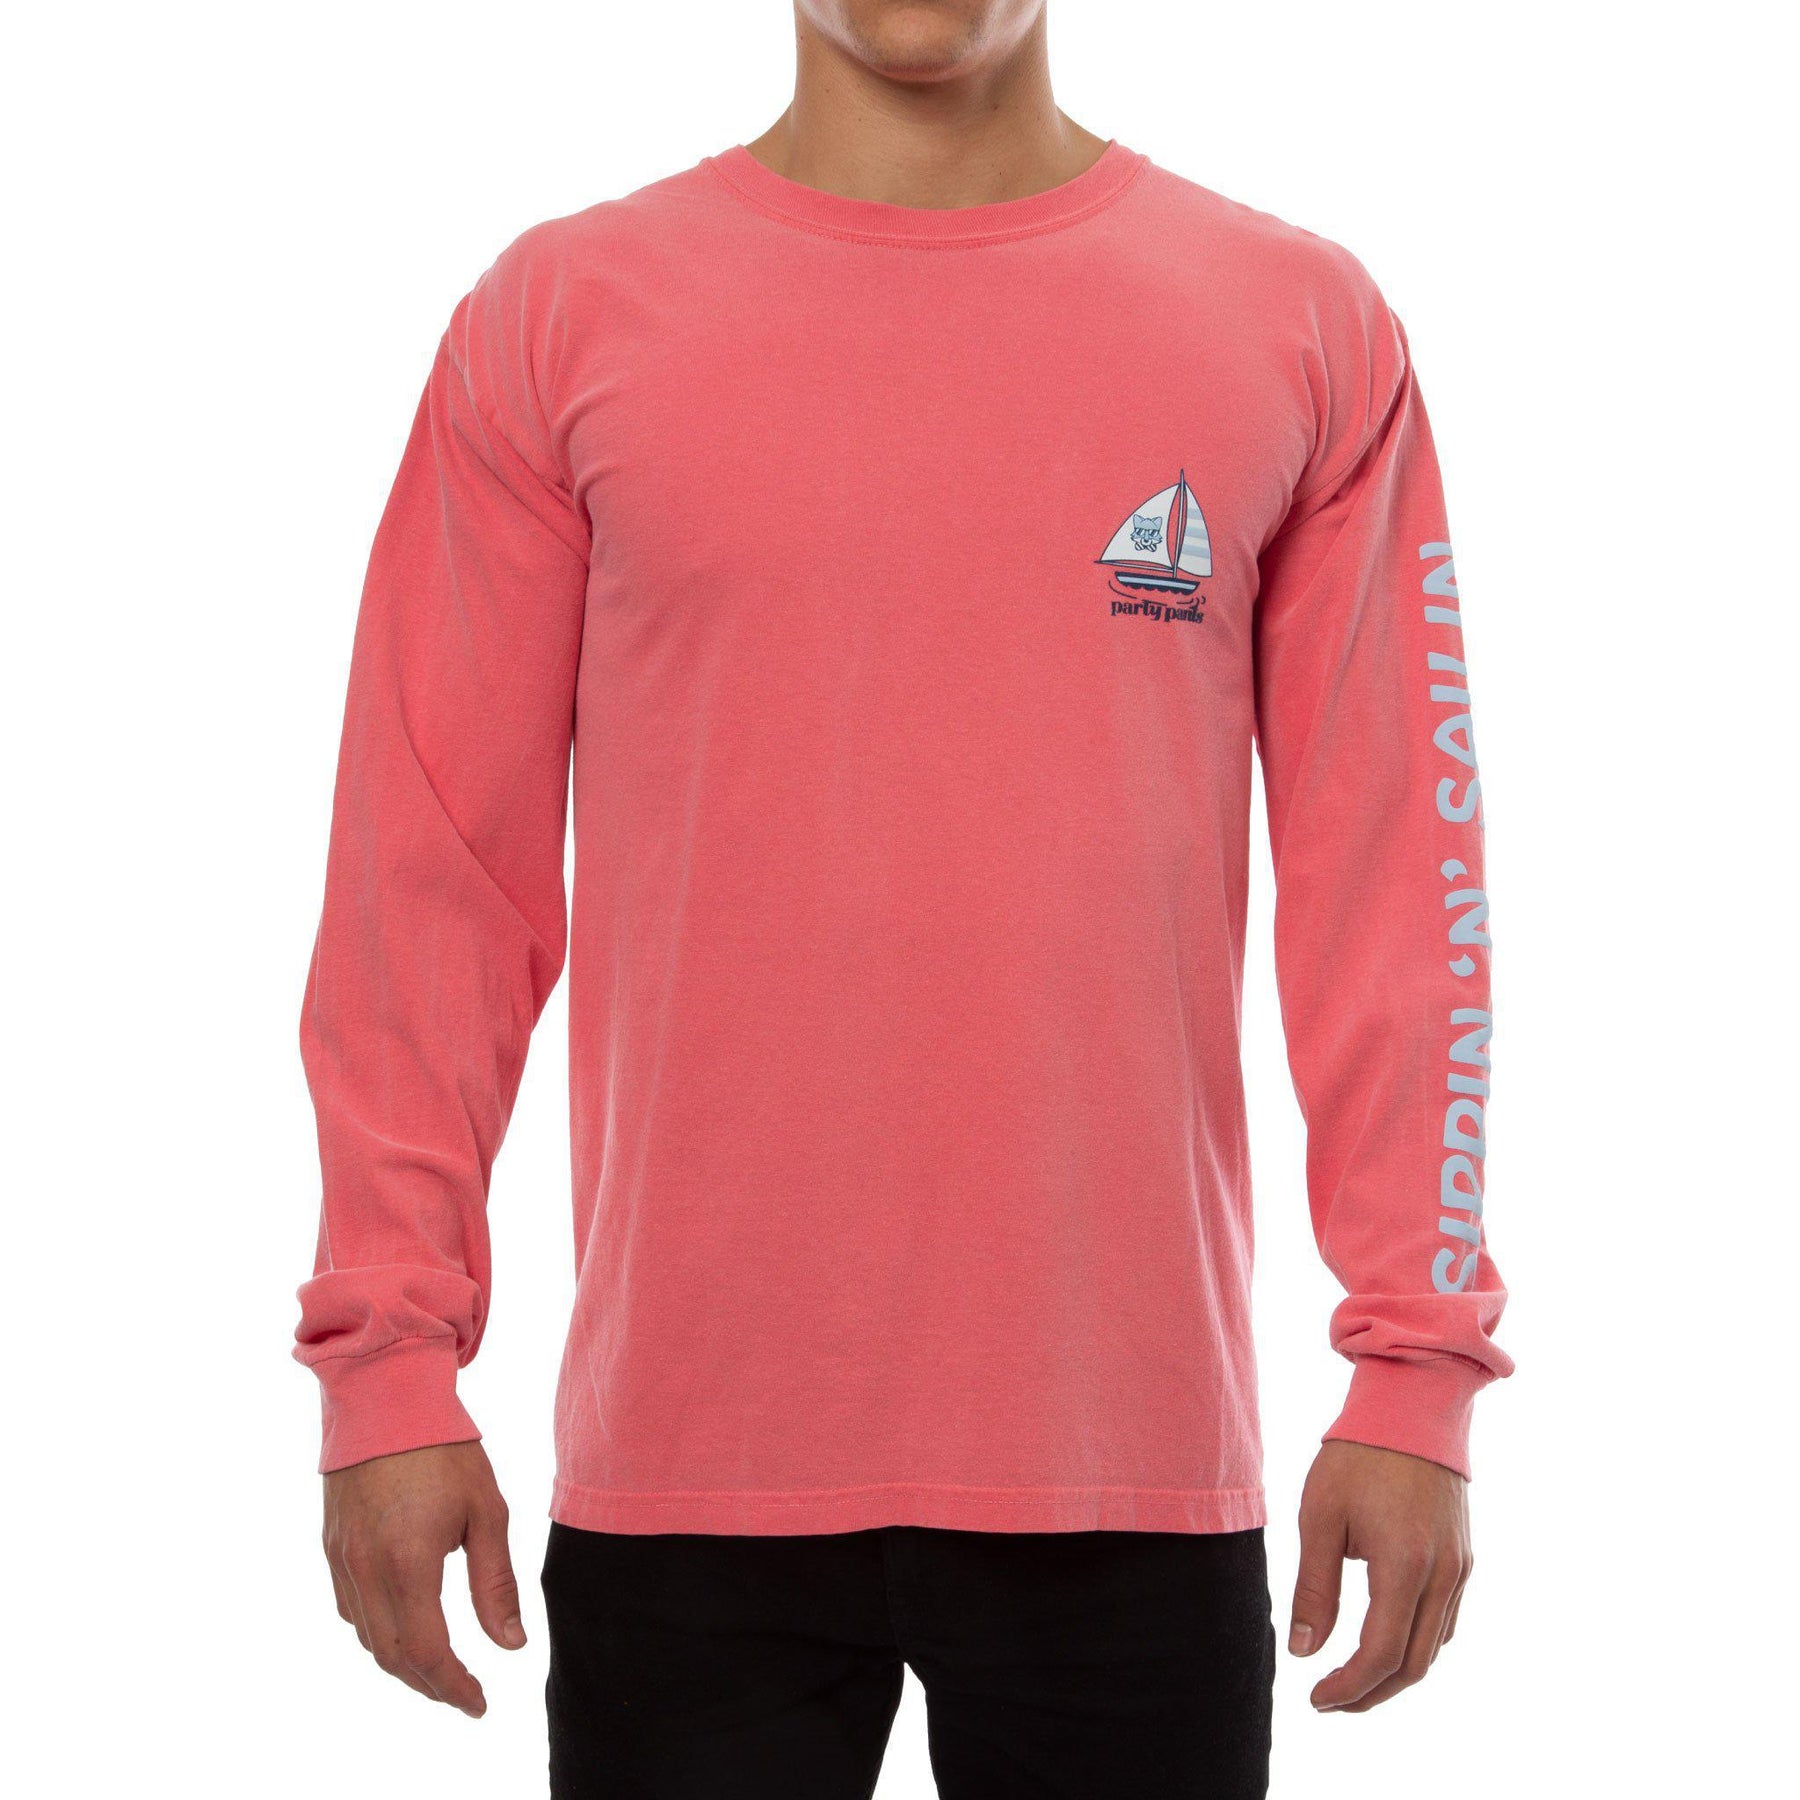 PARTY PANTS SIPPIN LONG SLEEVE TEE